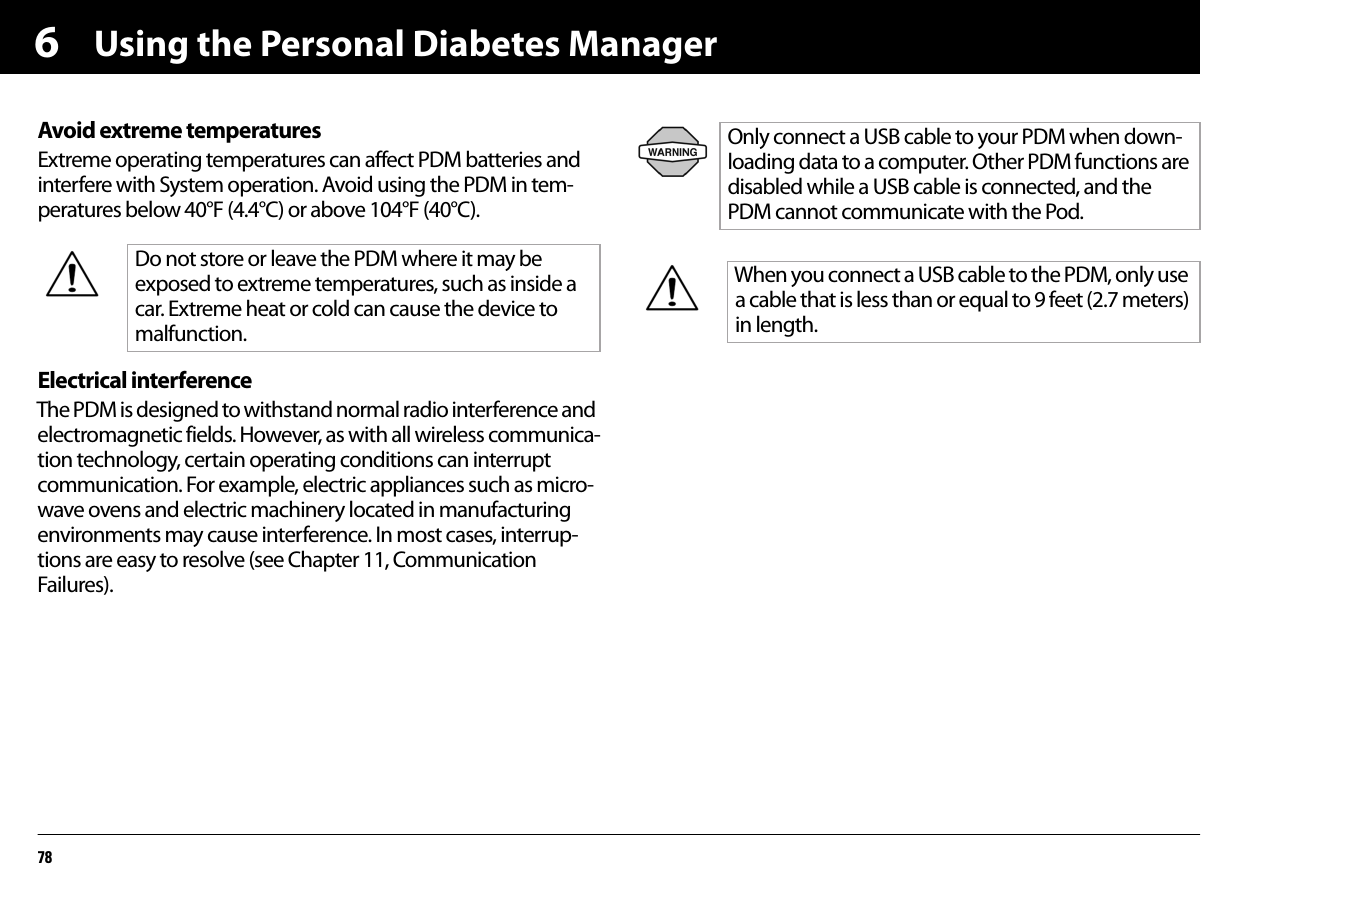 Using the Personal Diabetes Manager786Avoid extreme temperaturesExtreme operating temperatures can affect PDM batteries and interfere with System operation. Avoid using the PDM in tem-peratures below 40°F (4.4°C) or above 104°F (40°C).Electrical interferenceThe PDM is designed to withstand normal radio interference and electromagnetic fields. However, as with all wireless communica-tion technology, certain operating conditions can interrupt communication. For example, electric appliances such as micro-wave ovens and electric machinery located in manufacturing environments may cause interference. In most cases, interrup-tions are easy to resolve (see Chapter 11, Communication Failures).Do not store or leave the PDM where it may be exposed to extreme temperatures, such as inside a car. Extreme heat or cold can cause the device to malfunction.Only connect a USB cable to your PDM when down-loading data to a computer. Other PDM functions are disabled while a USB cable is connected, and the PDM cannot communicate with the Pod.When you connect a USB cable to the PDM, only use a cable that is less than or equal to 9 feet (2.7 meters) in length.